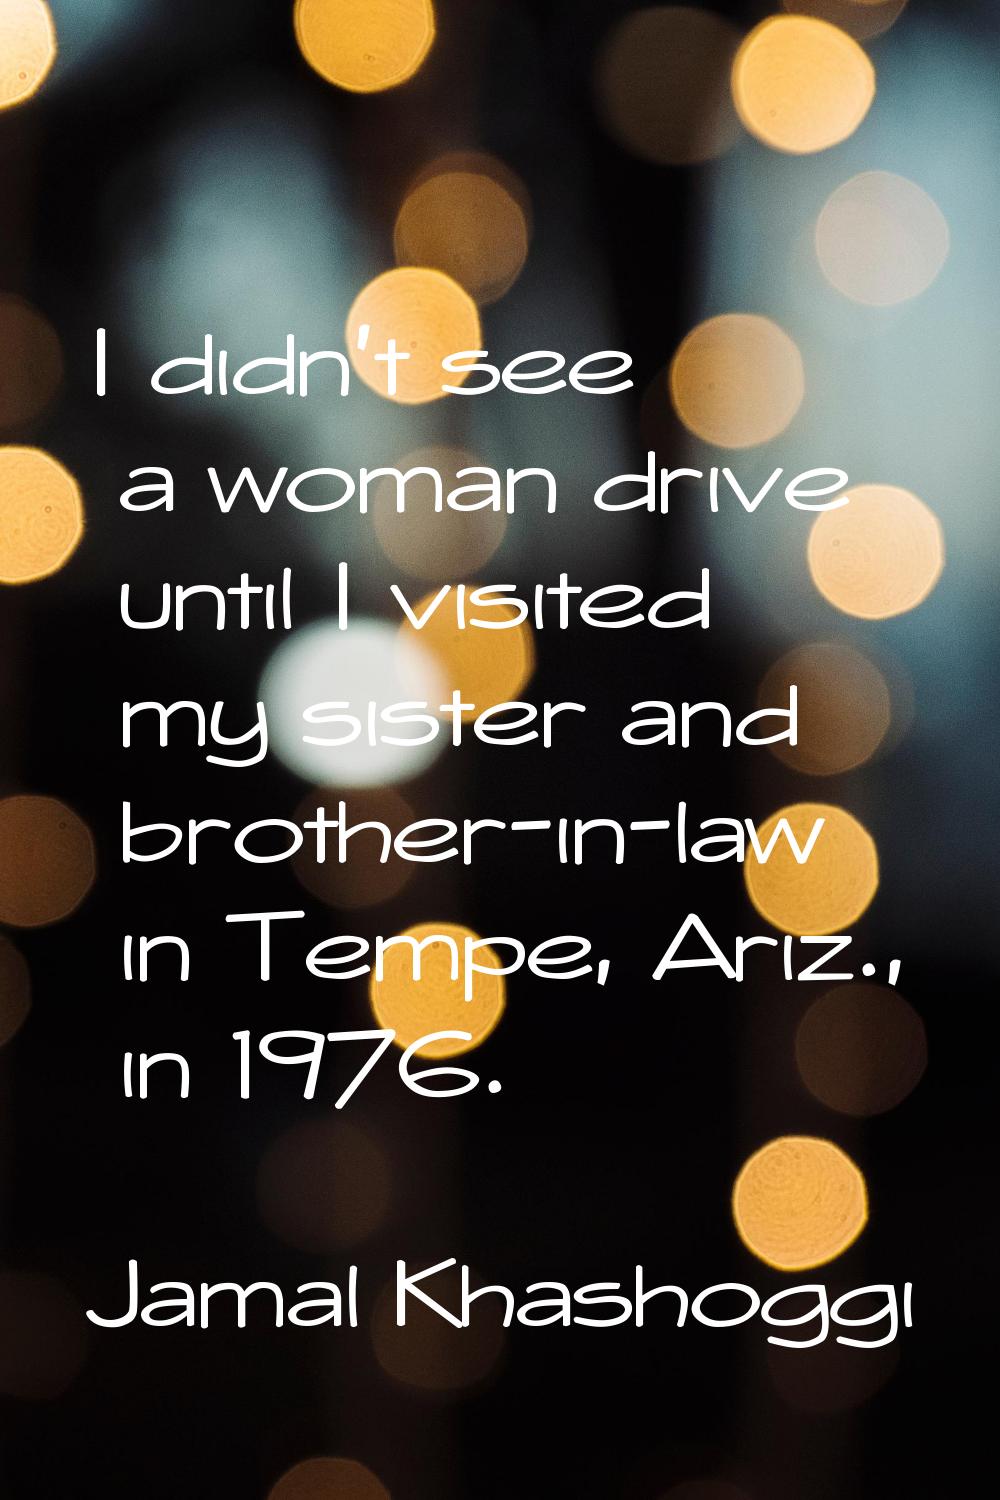 I didn't see a woman drive until I visited my sister and brother-in-law in Tempe, Ariz., in 1976.